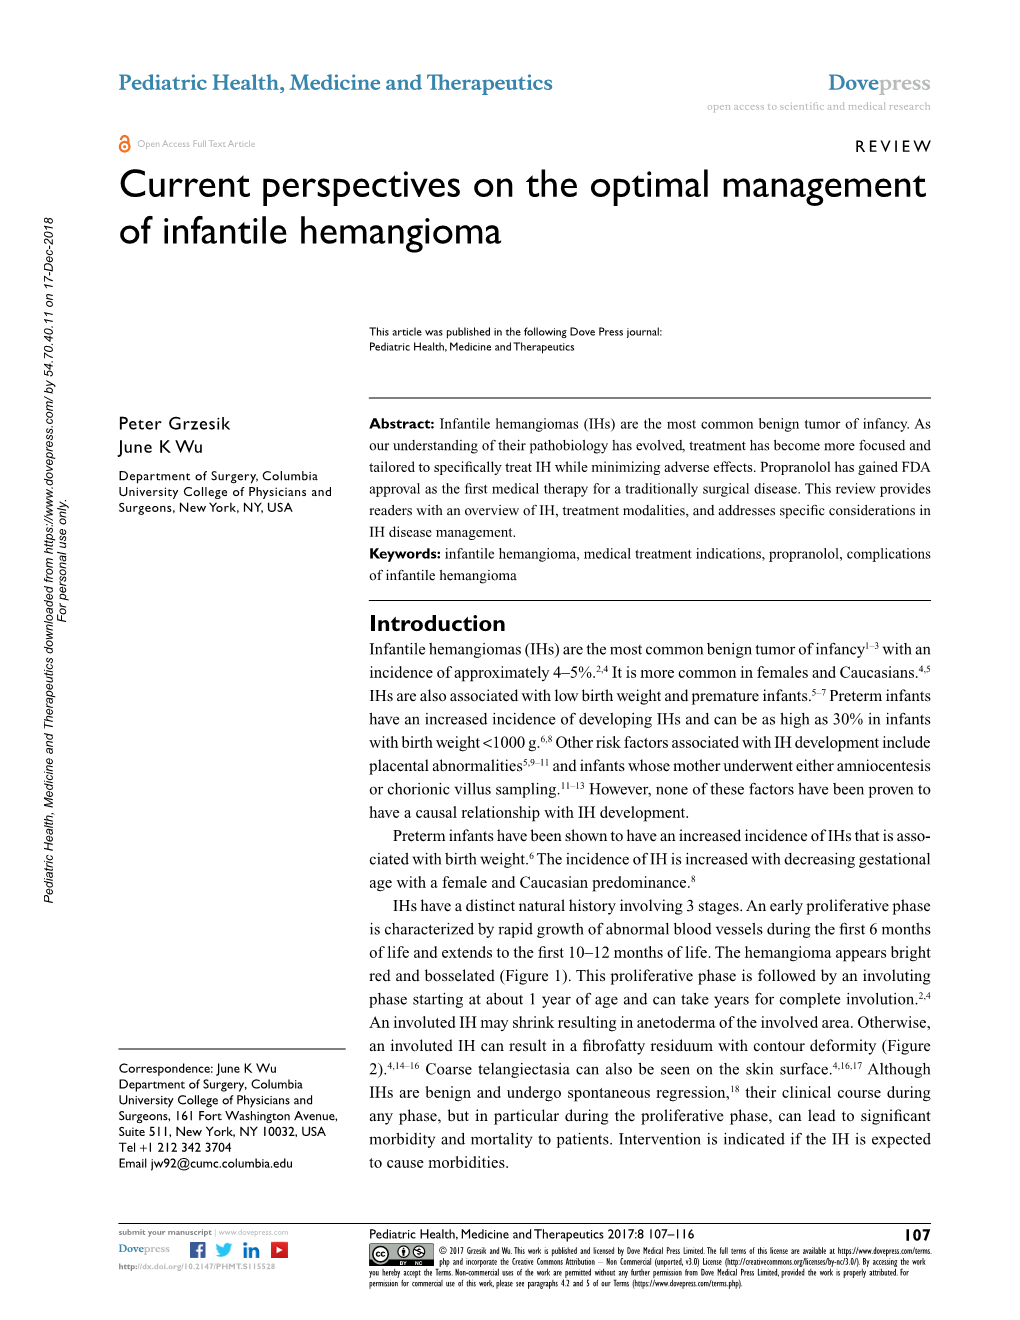 Current Perspectives on the Optimal Management of Infantile Hemangioma